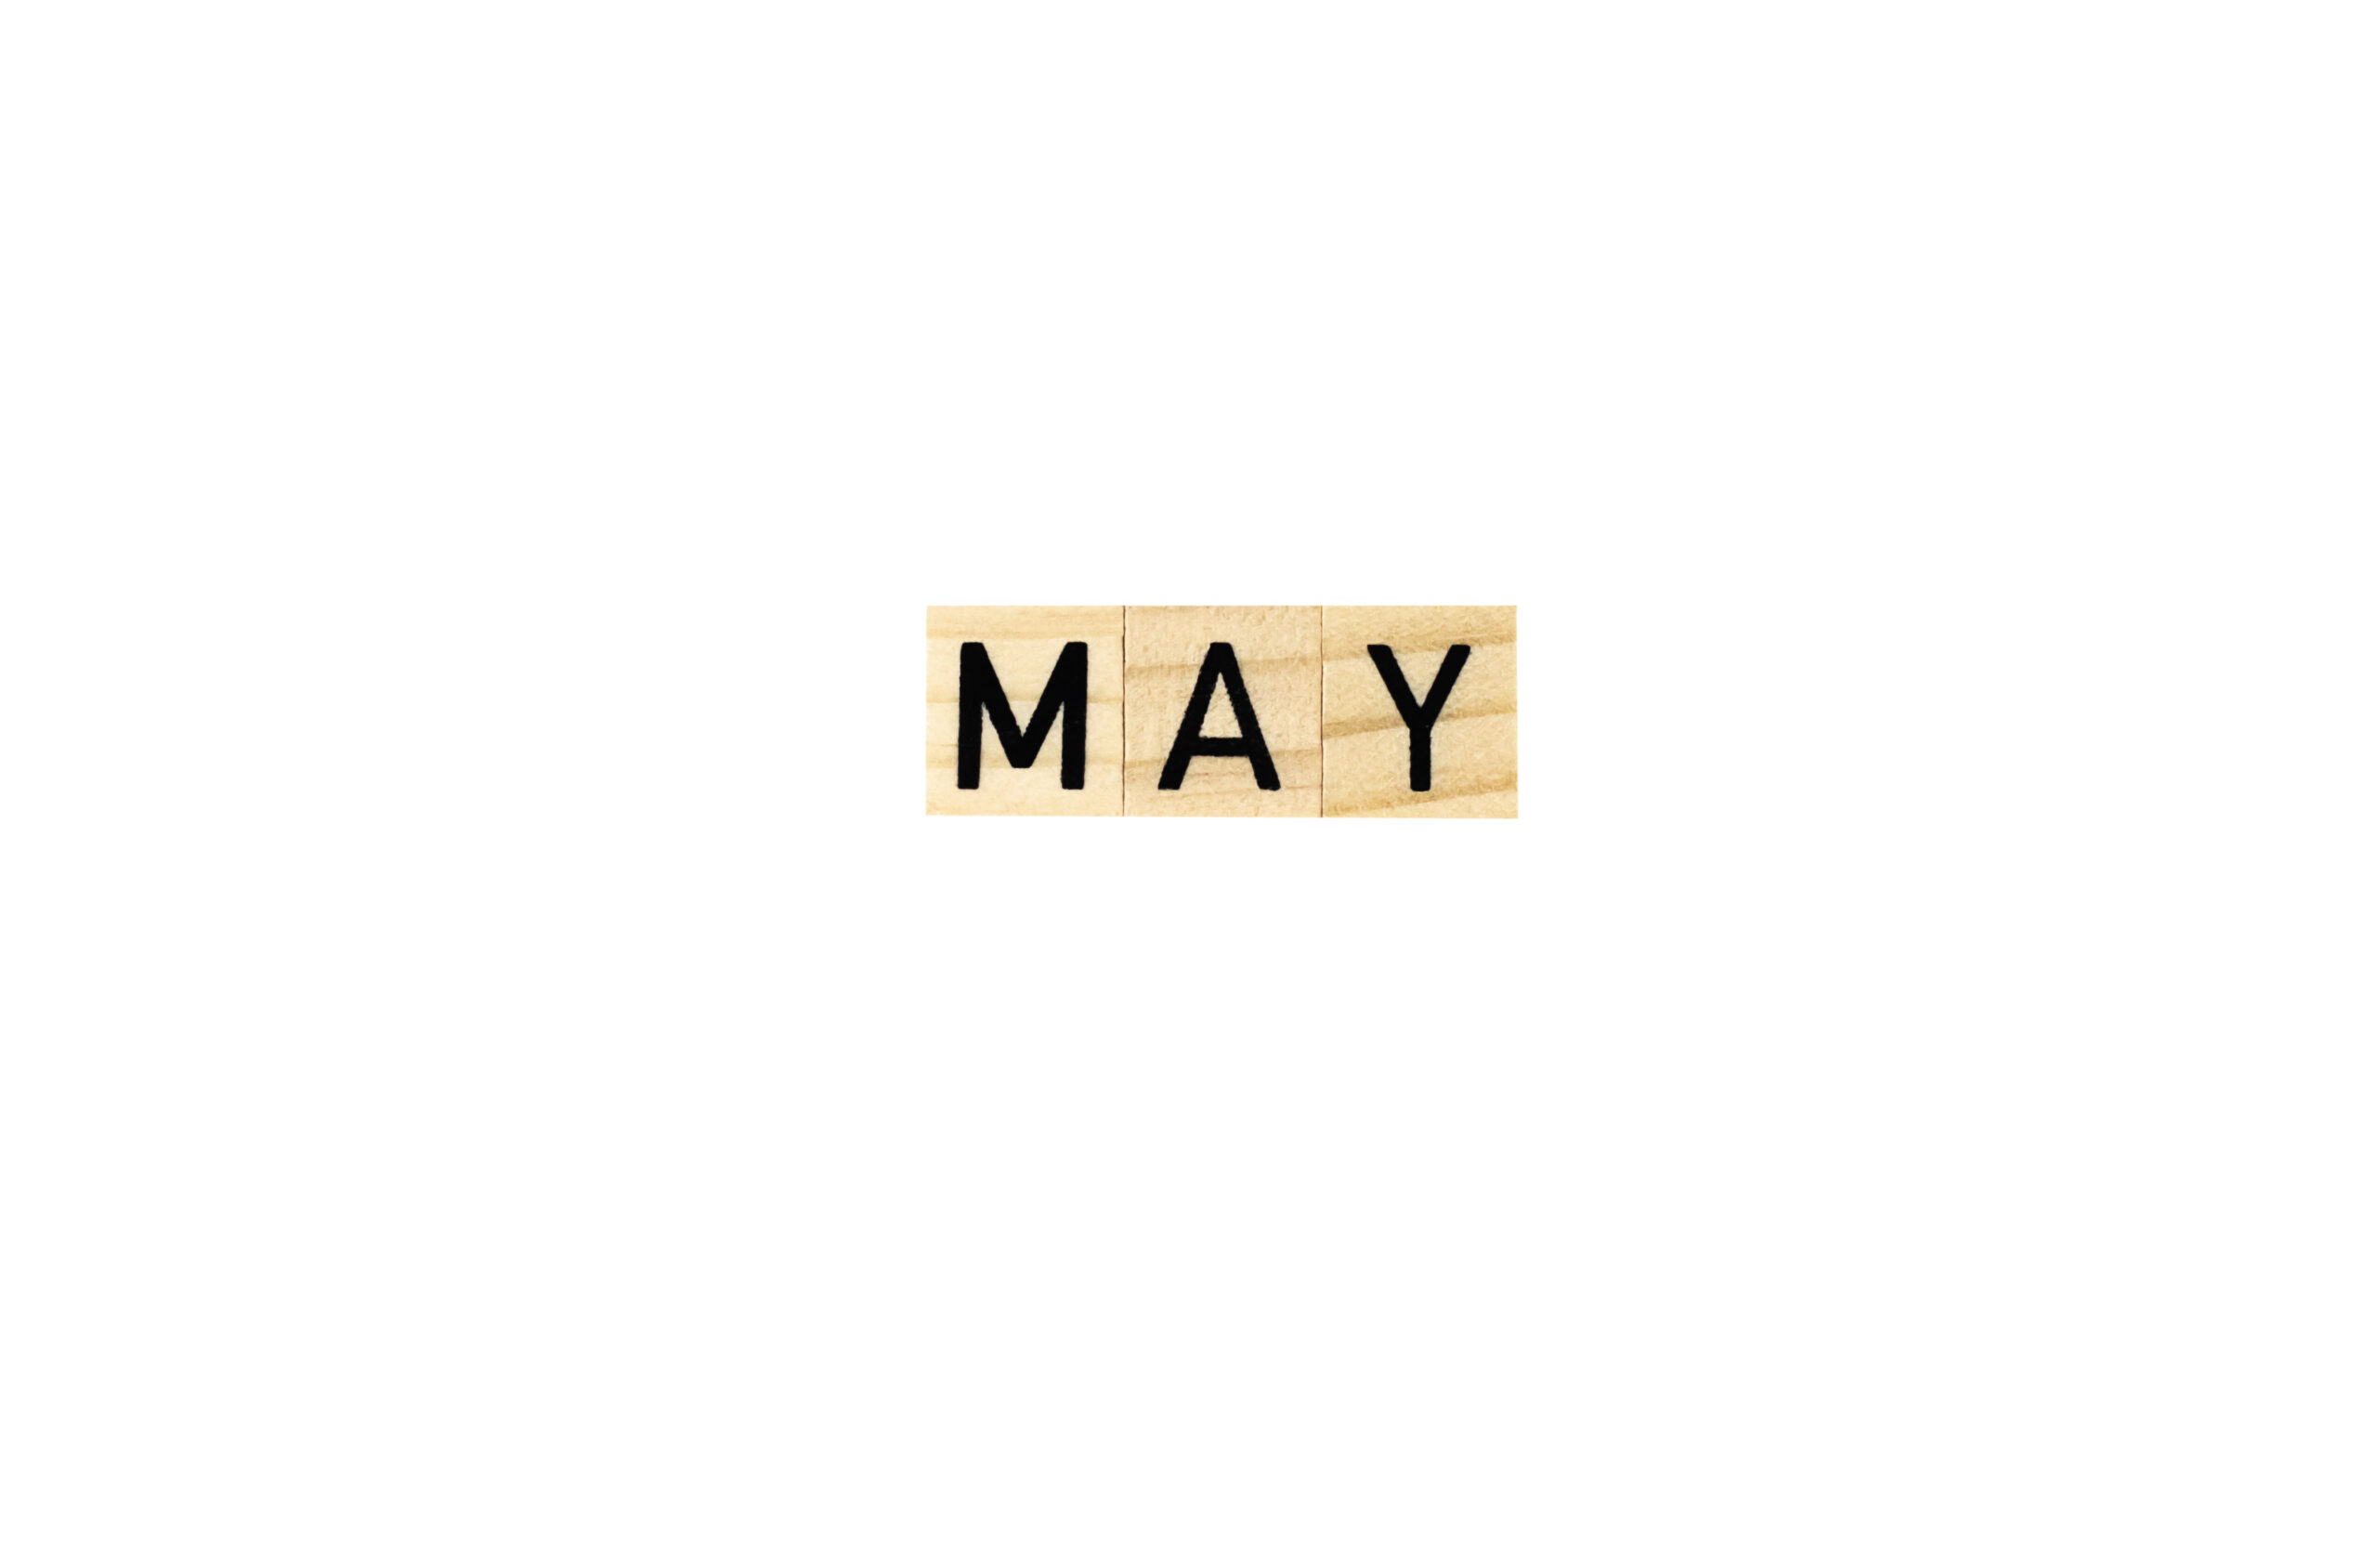 the-word-may-in-wooden-letters-on-a-white-backgrou-2023-04-28-00-39-08-utc